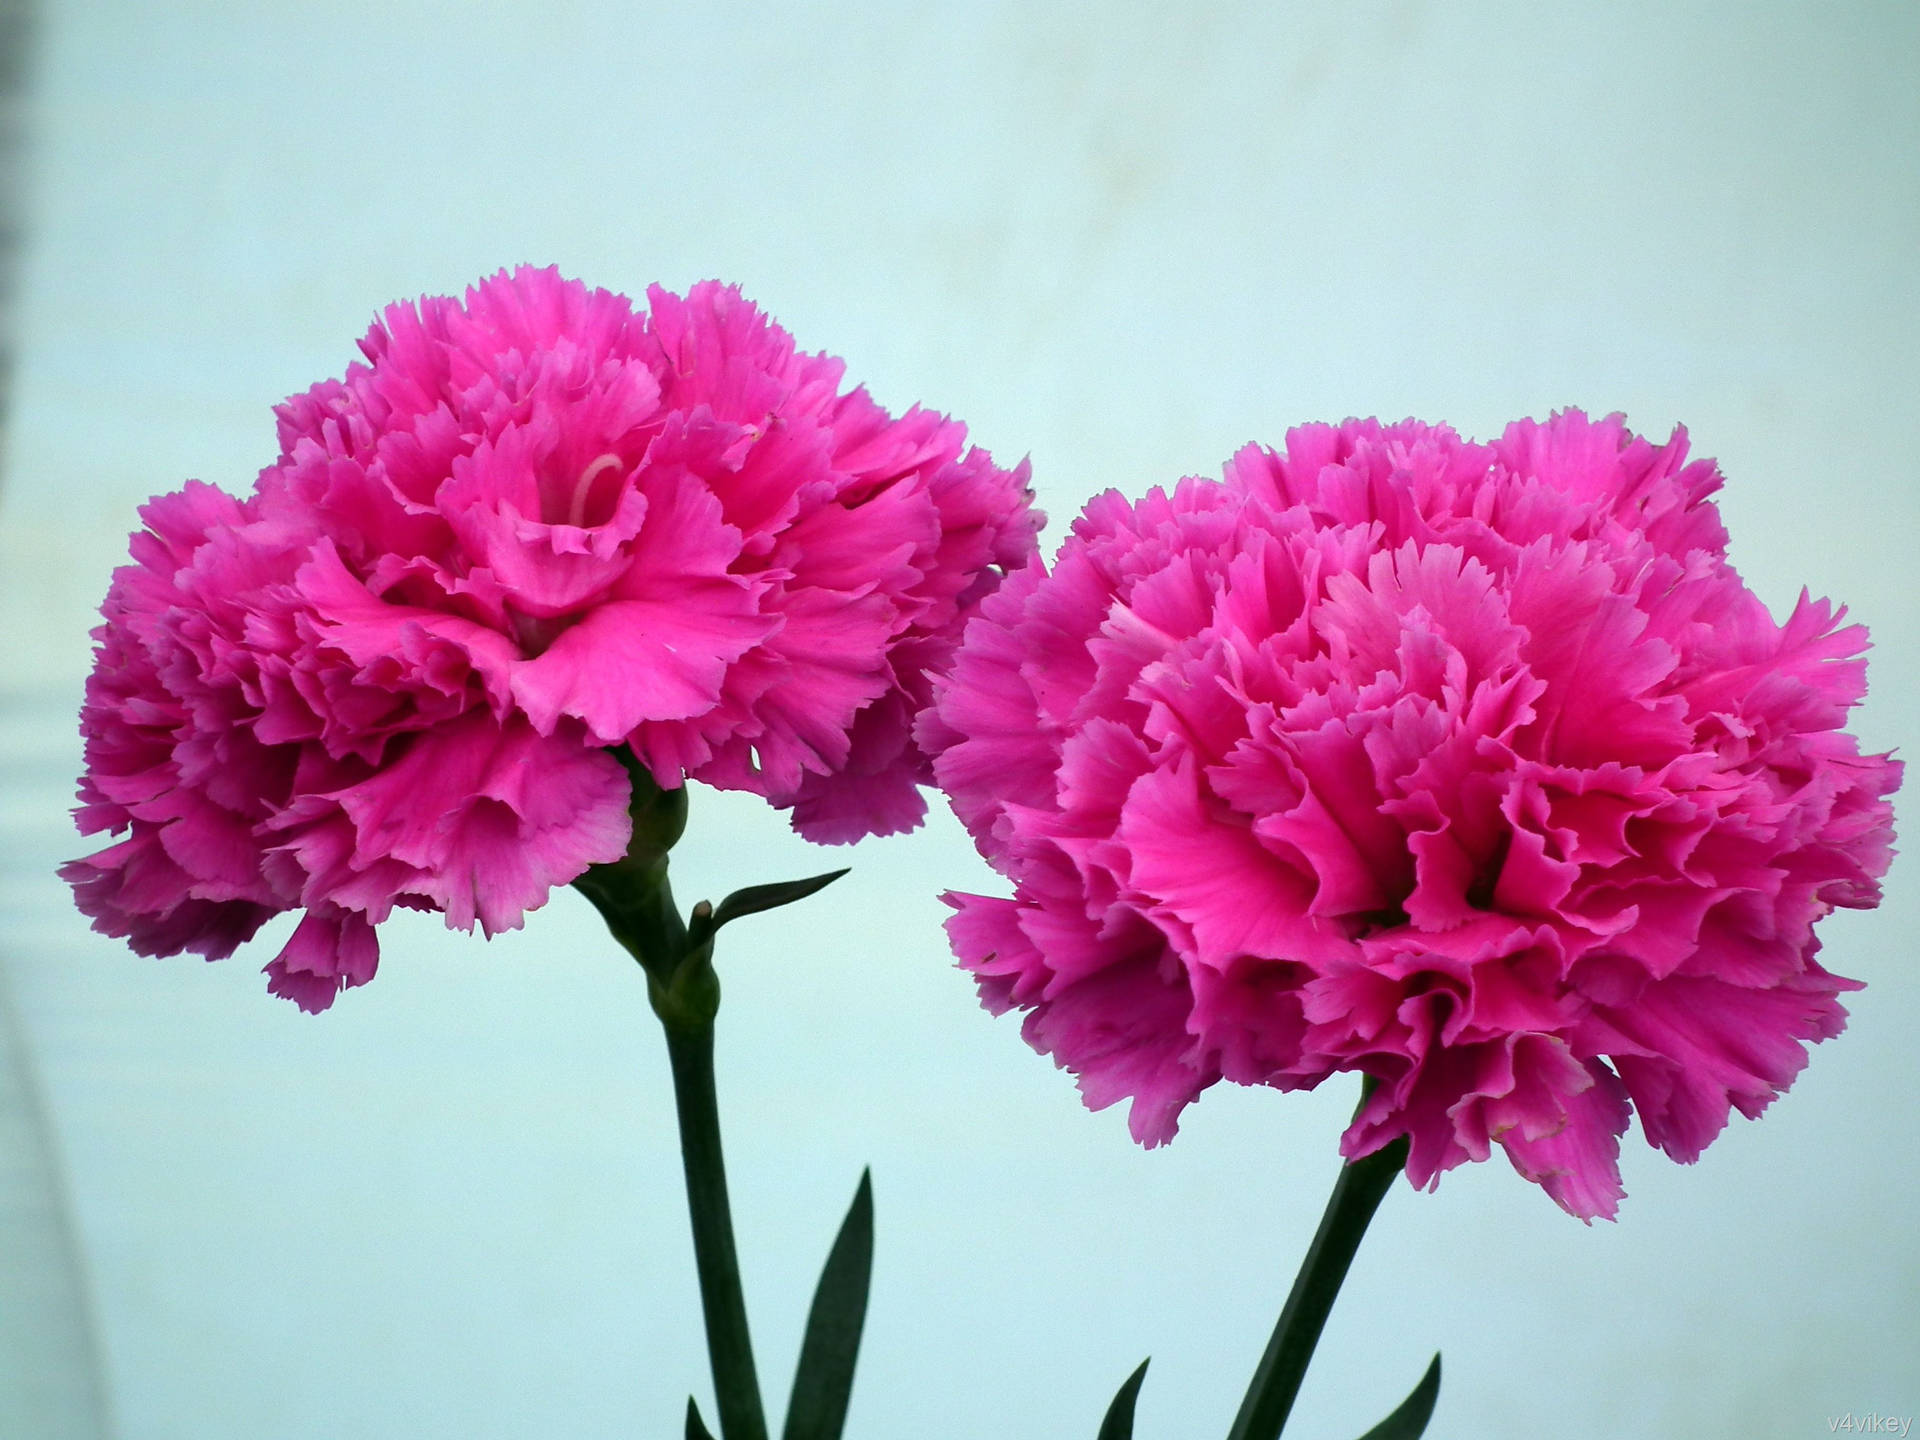 Caption: A Bouquet of Vibrant Hot Pink Carnations Wallpaper